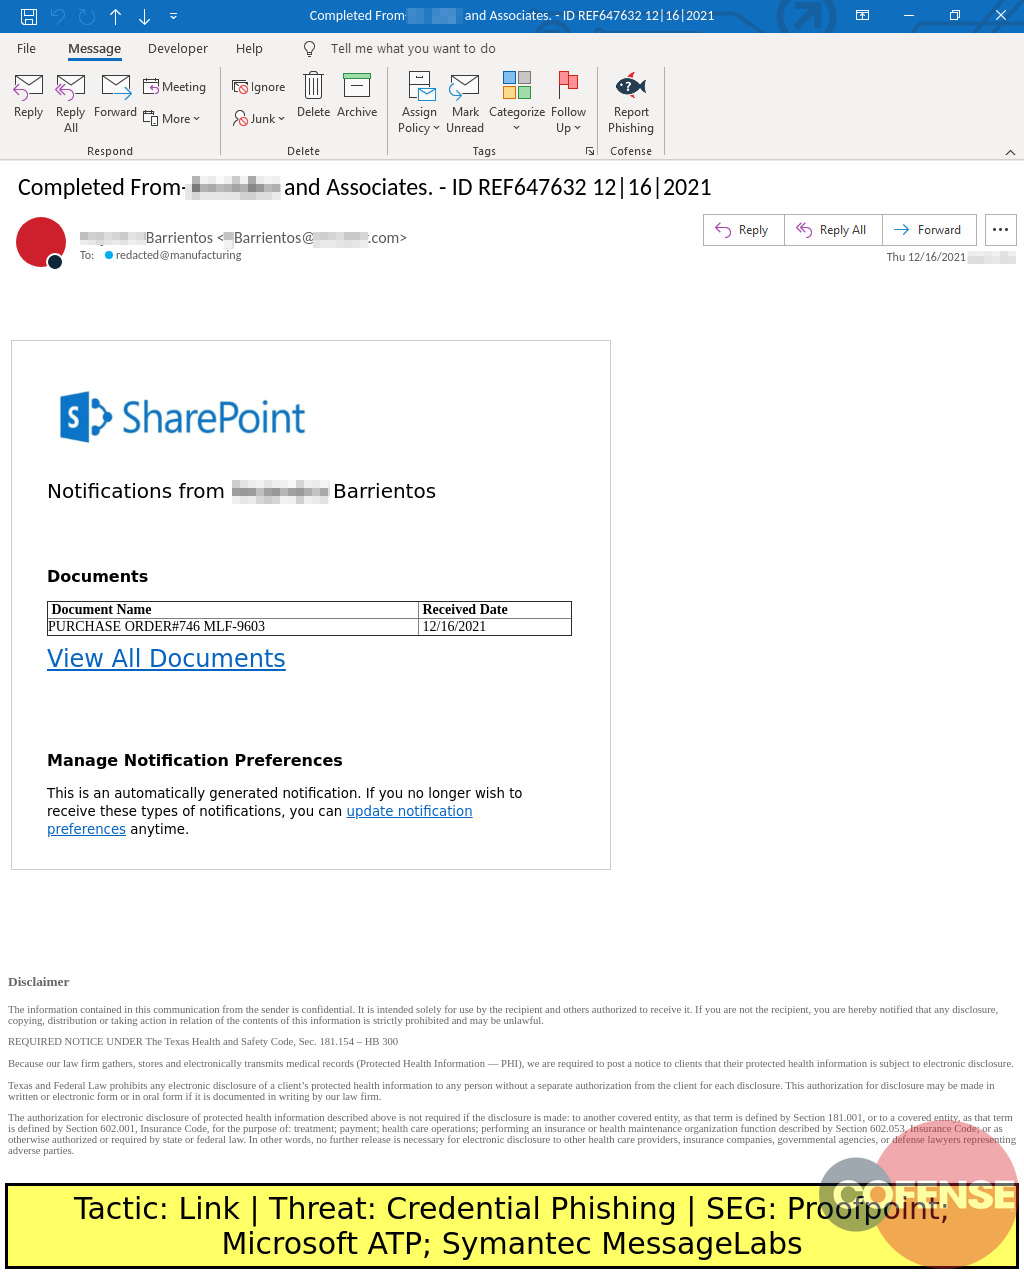 Real Phishing Example: Notification-themed emails found in environments protected by Proofpoint, Microsoft ATP, and Symantec MessageLabs deliver Credential Phishing via an embedded link.